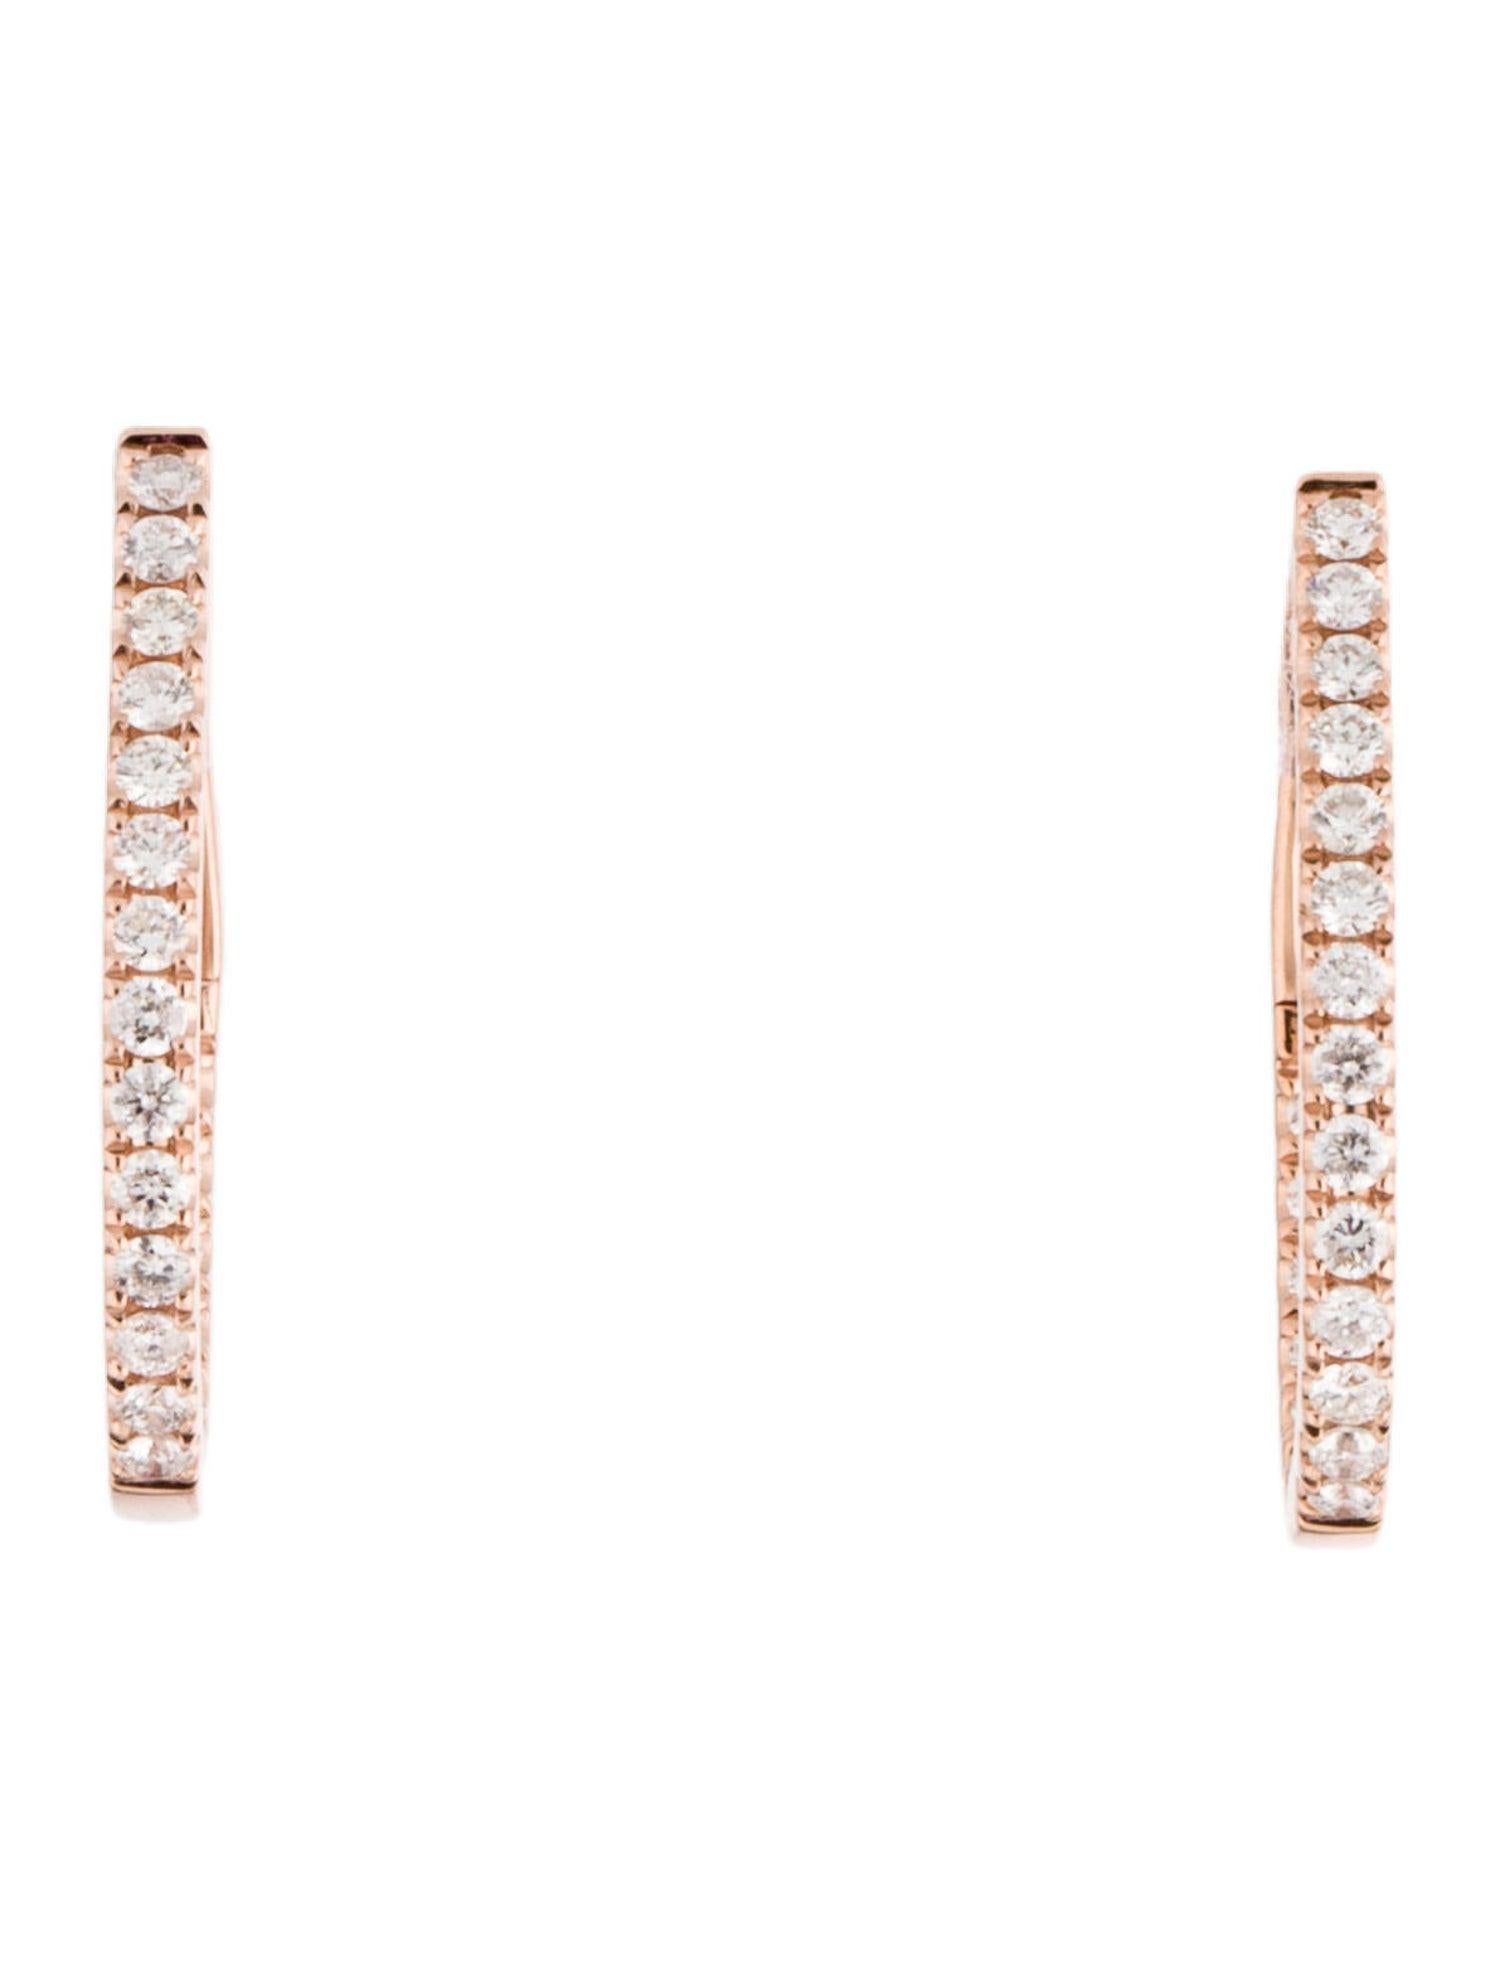 Quality Diamond Hoops: Made from real 14k gold and 44 glittering natural white approximately 0.65 ct. Certified diamonds, featuring a single row of white diamonds on the inside and outside of the earrings with a color and clarity of GH-SI. Earring